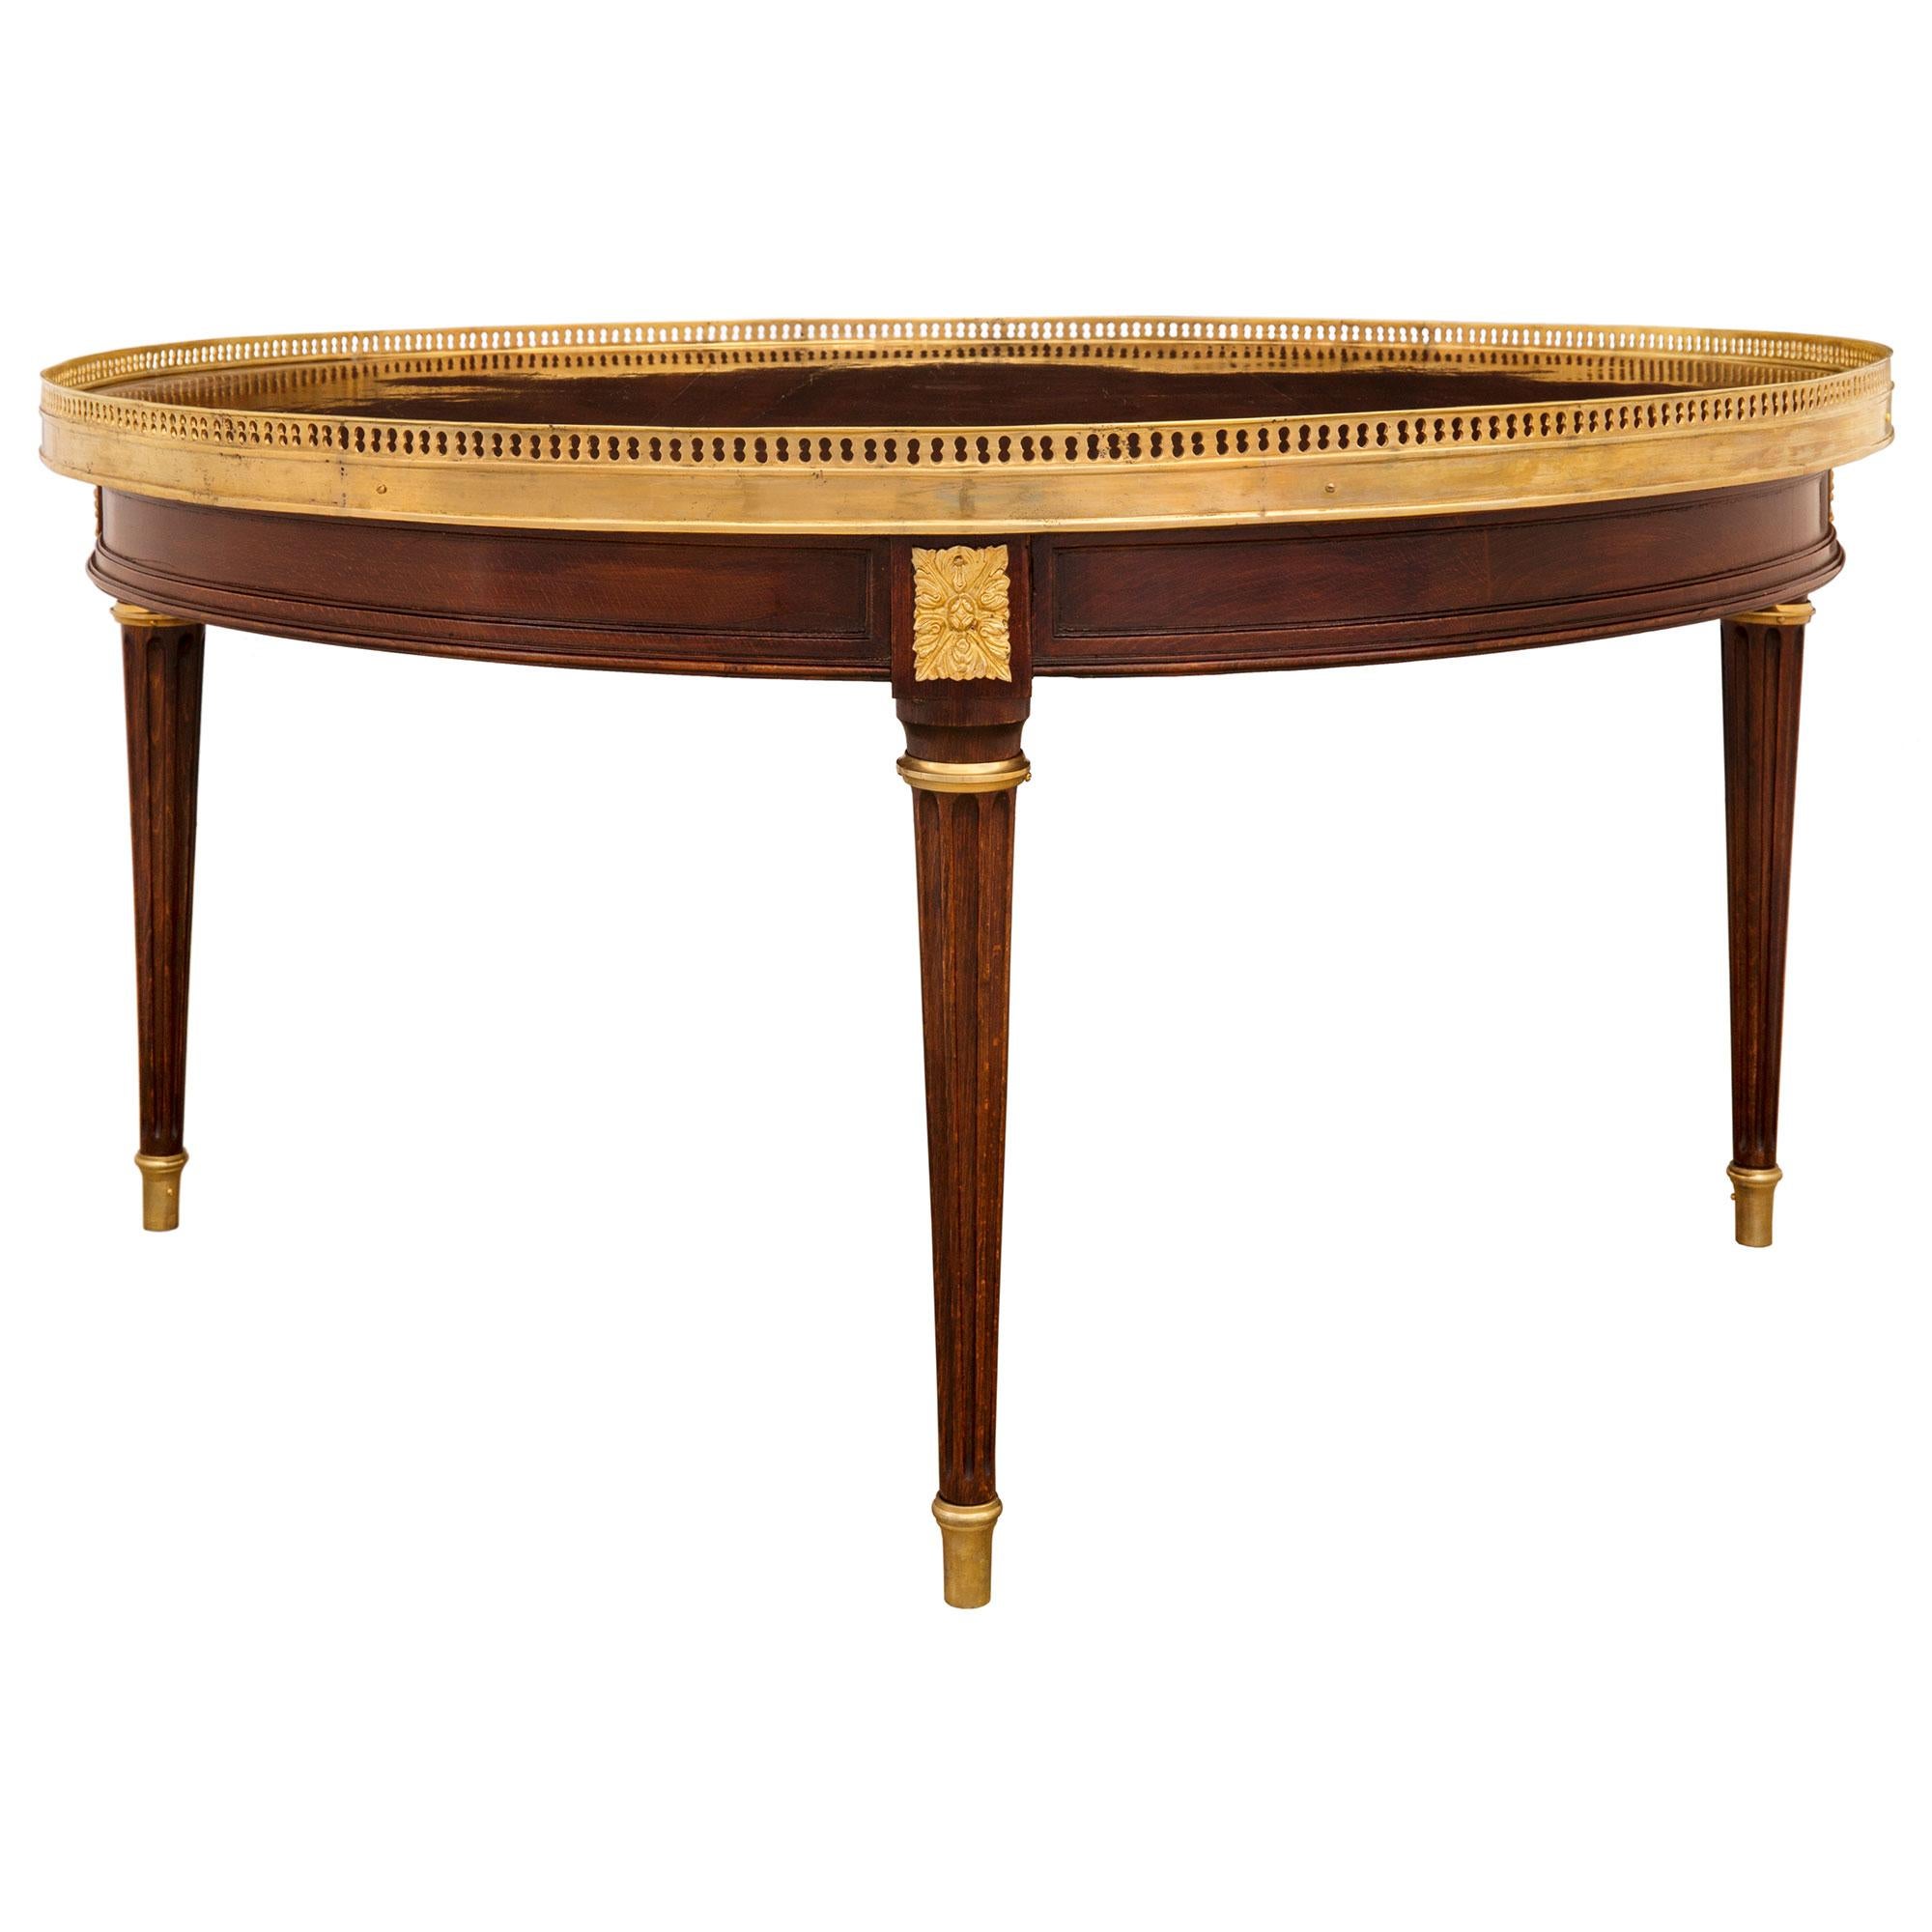 19th Century French Louis XVI Style Mahogany and Ormolu Cocktail or Coffee Table For Sale